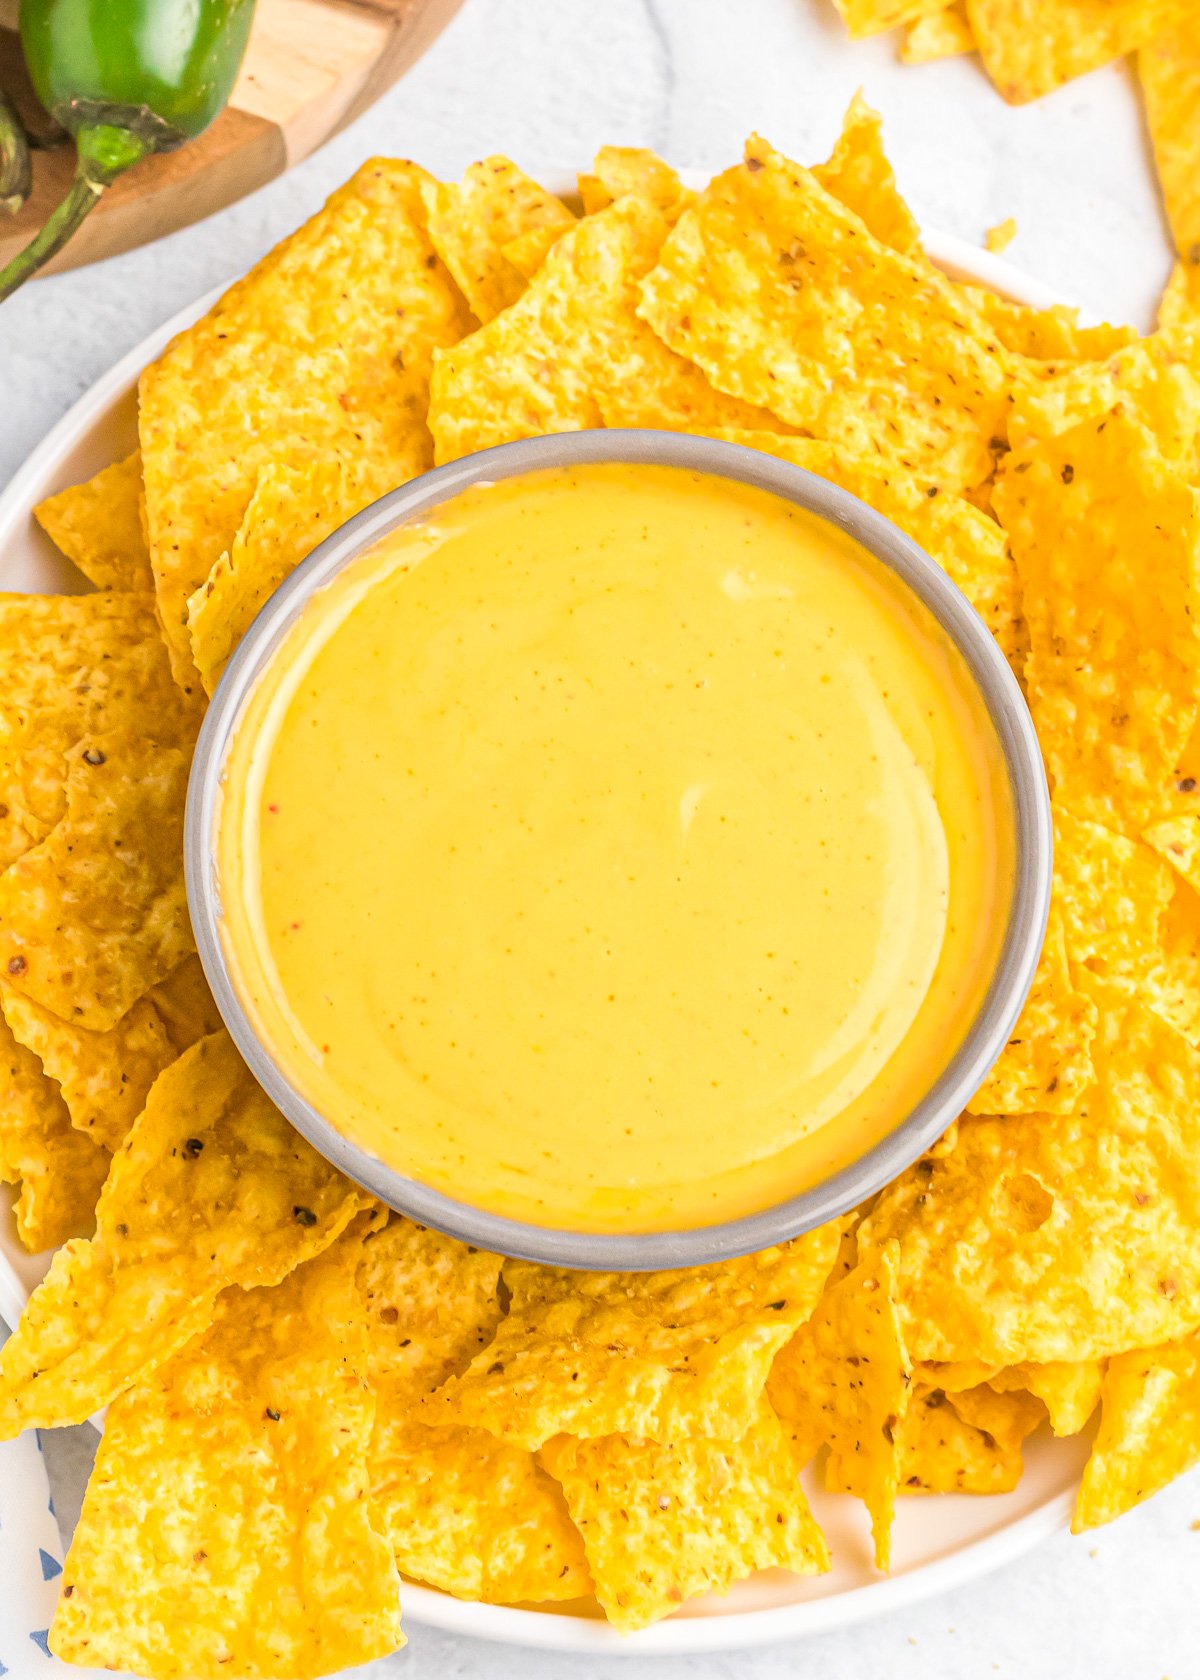 Nacho cheese served with tortilla chips.